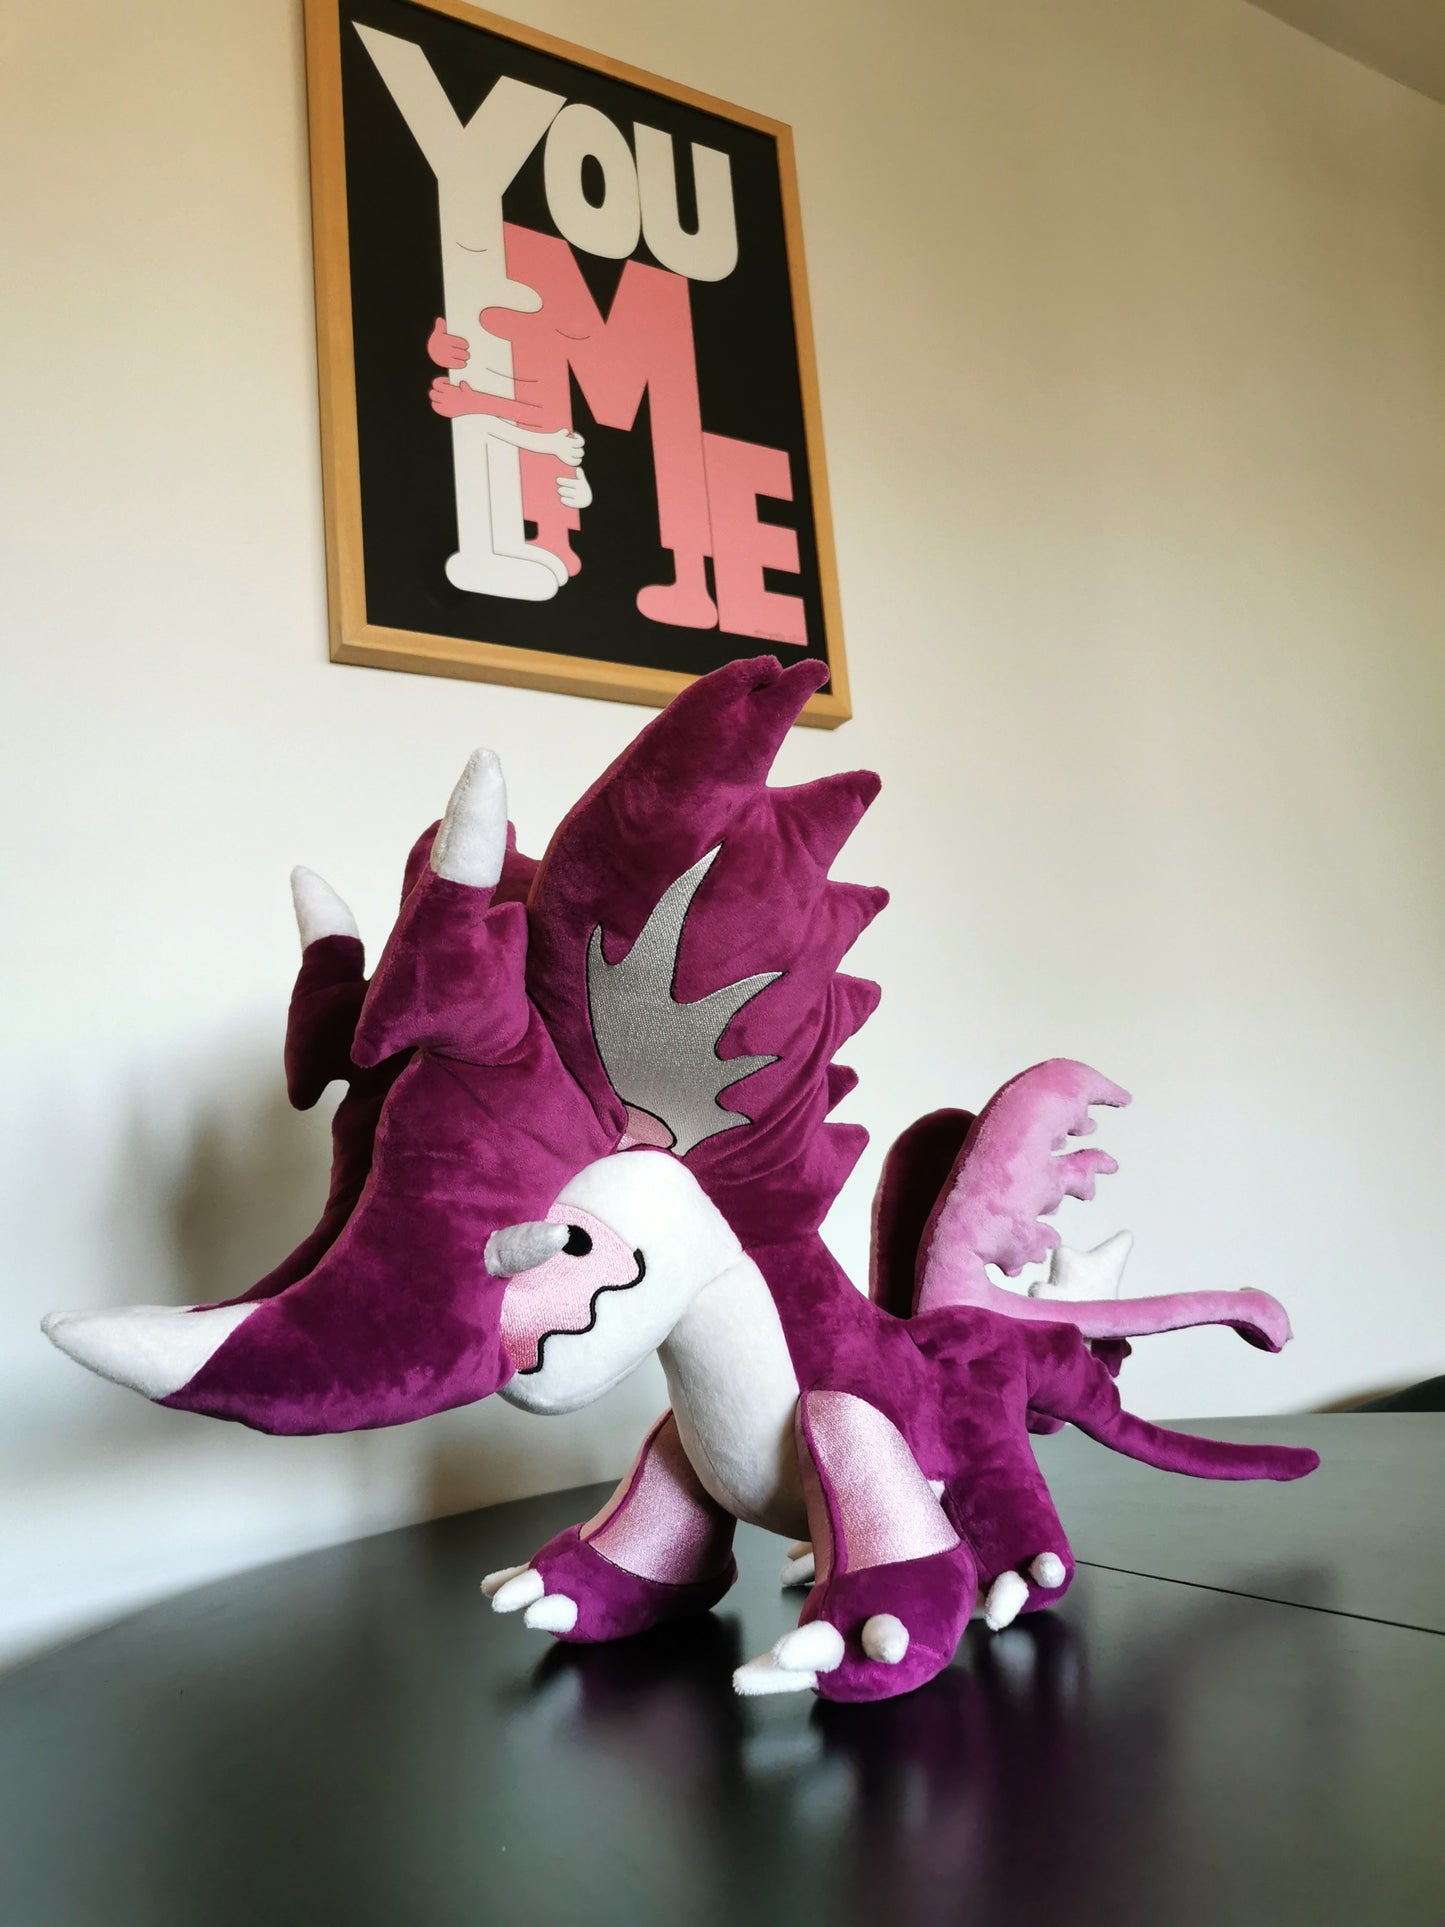 Pink dragon inspired by Veidreki from “Dragon Adventures” on Roblox, custom storm dragon, weighted beads plush 60cm